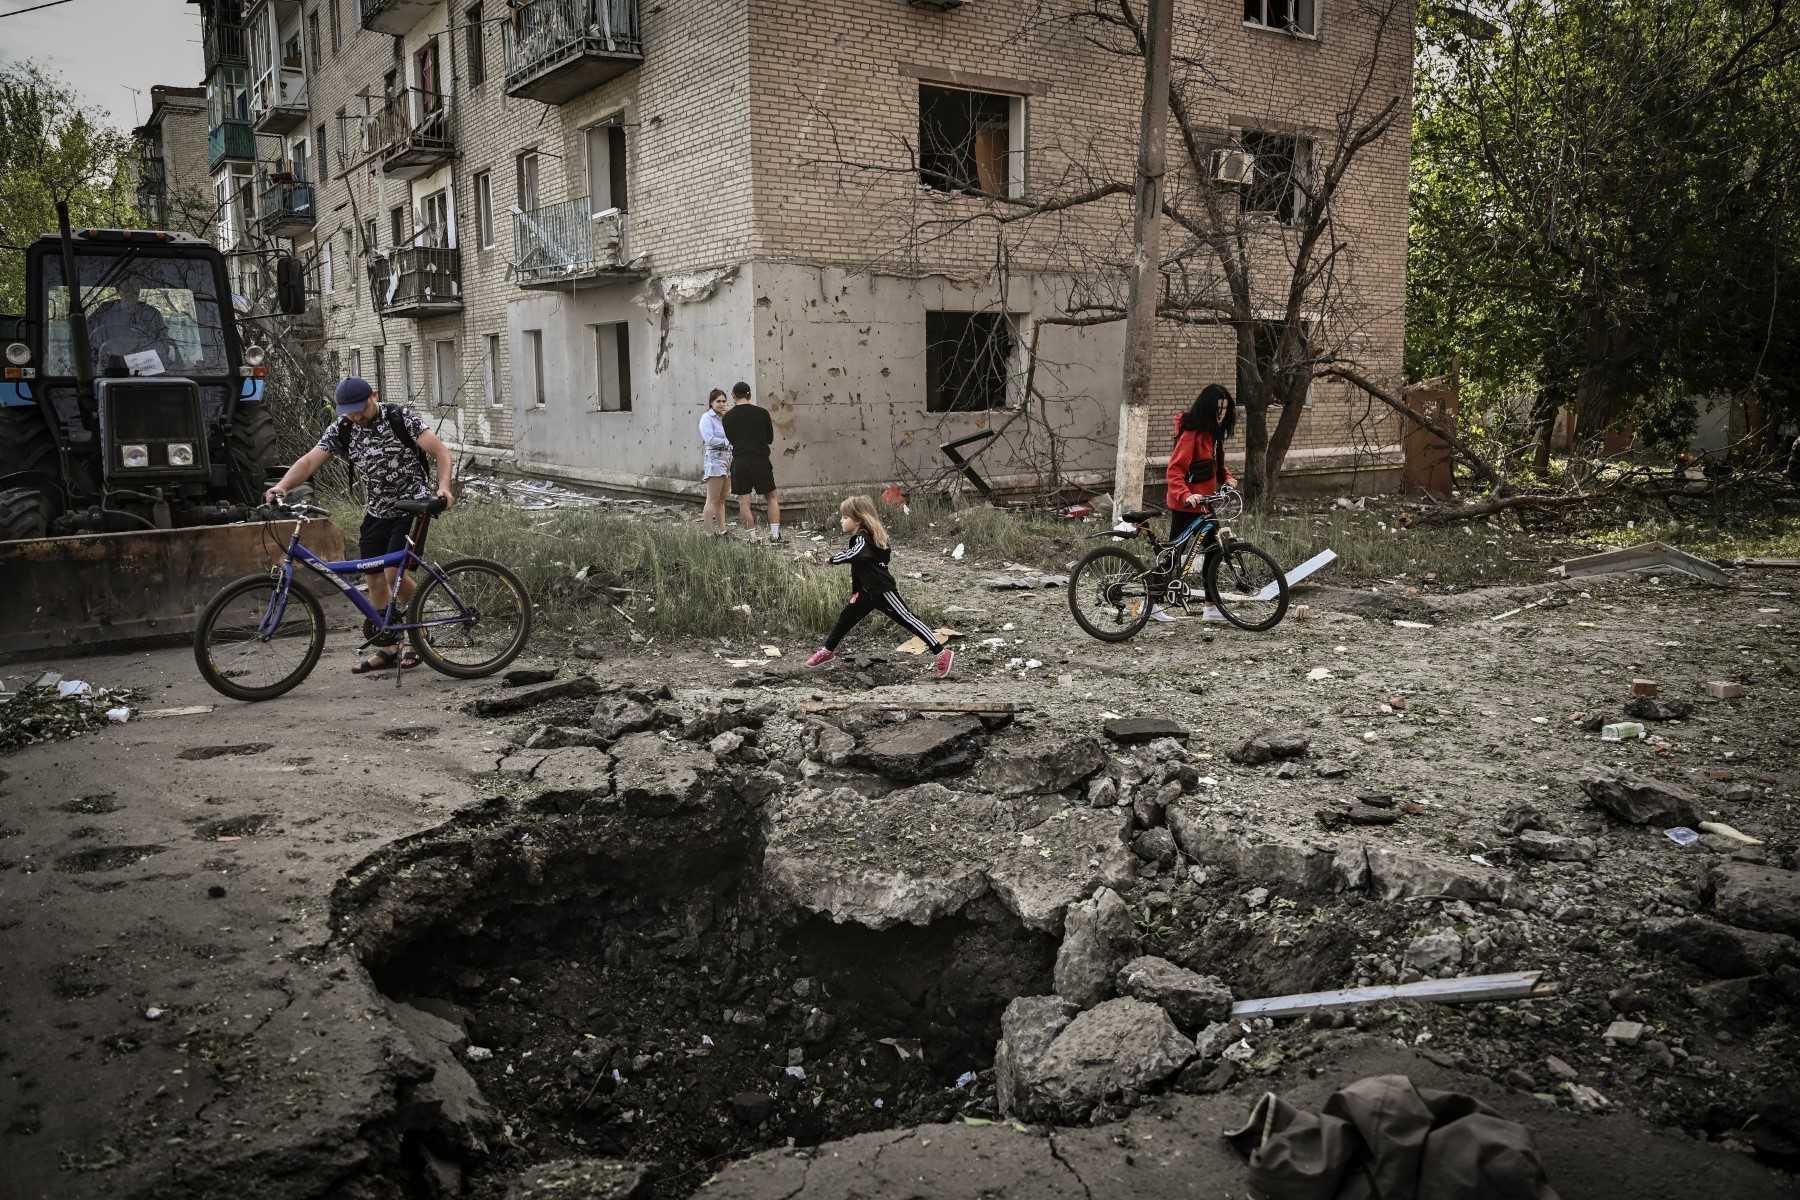 A young girl walks by a crater in front of a damaged apartment building after a strike in the city of Sloviansk at the eastern Ukrainian region of Donbas on May 31, amid the Russian invasion of Ukraine. Photo: AFP